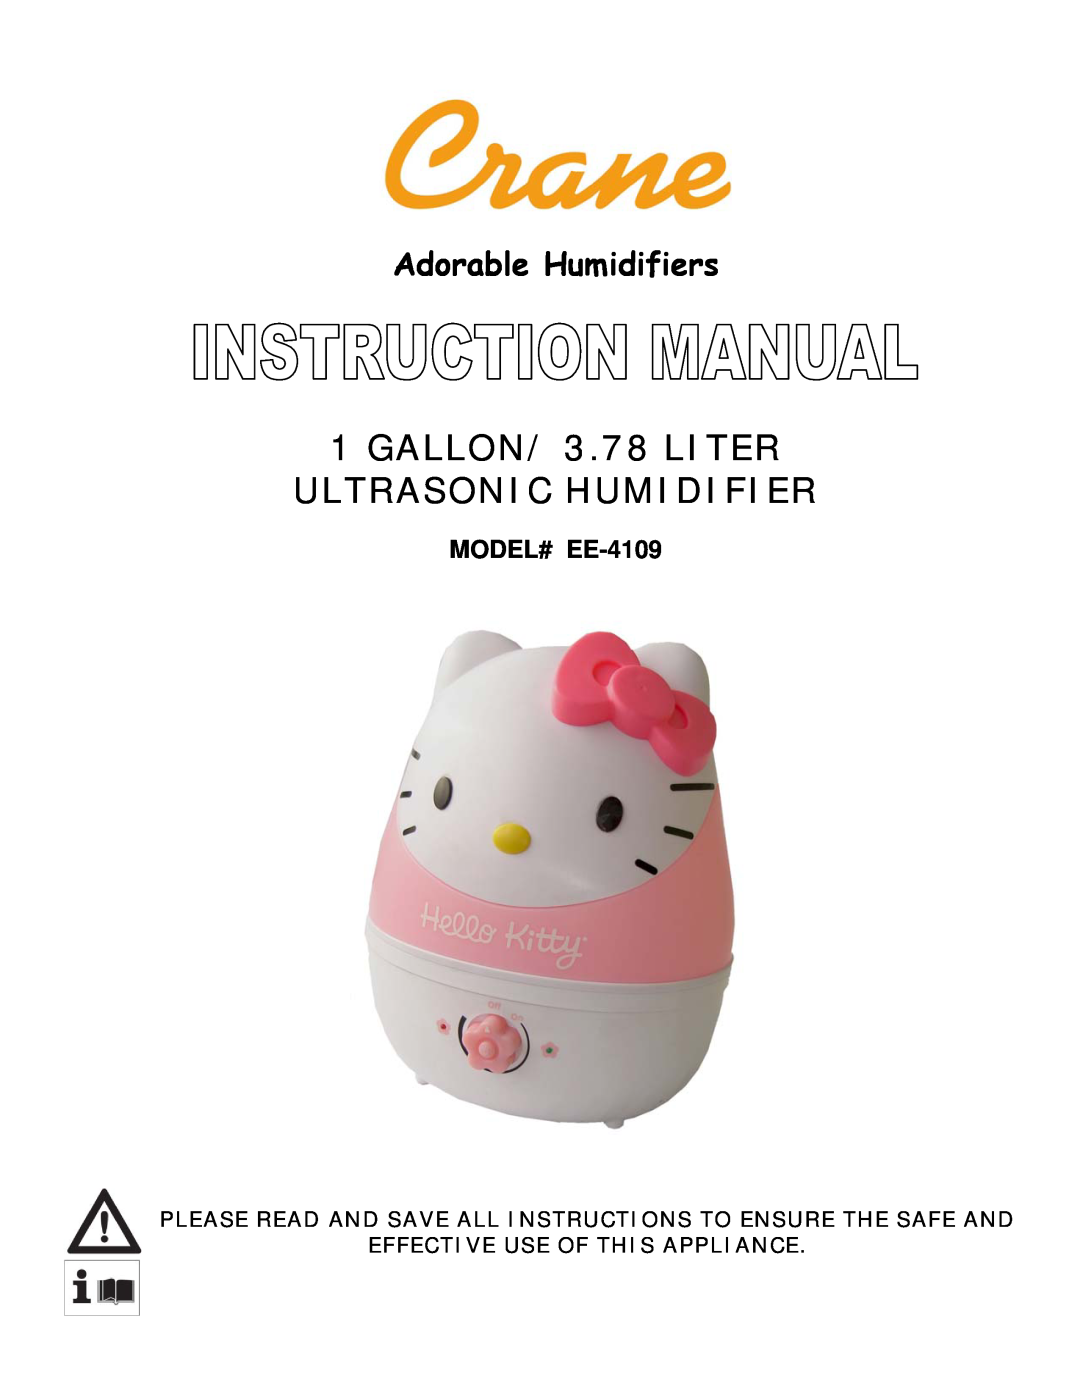 Crane EE-4109 manual GALLON/ 3.78 LITER ULTRASONIC HUMIDIFIER, Effective Use Of This Appliance, Adorable Humidifiers 